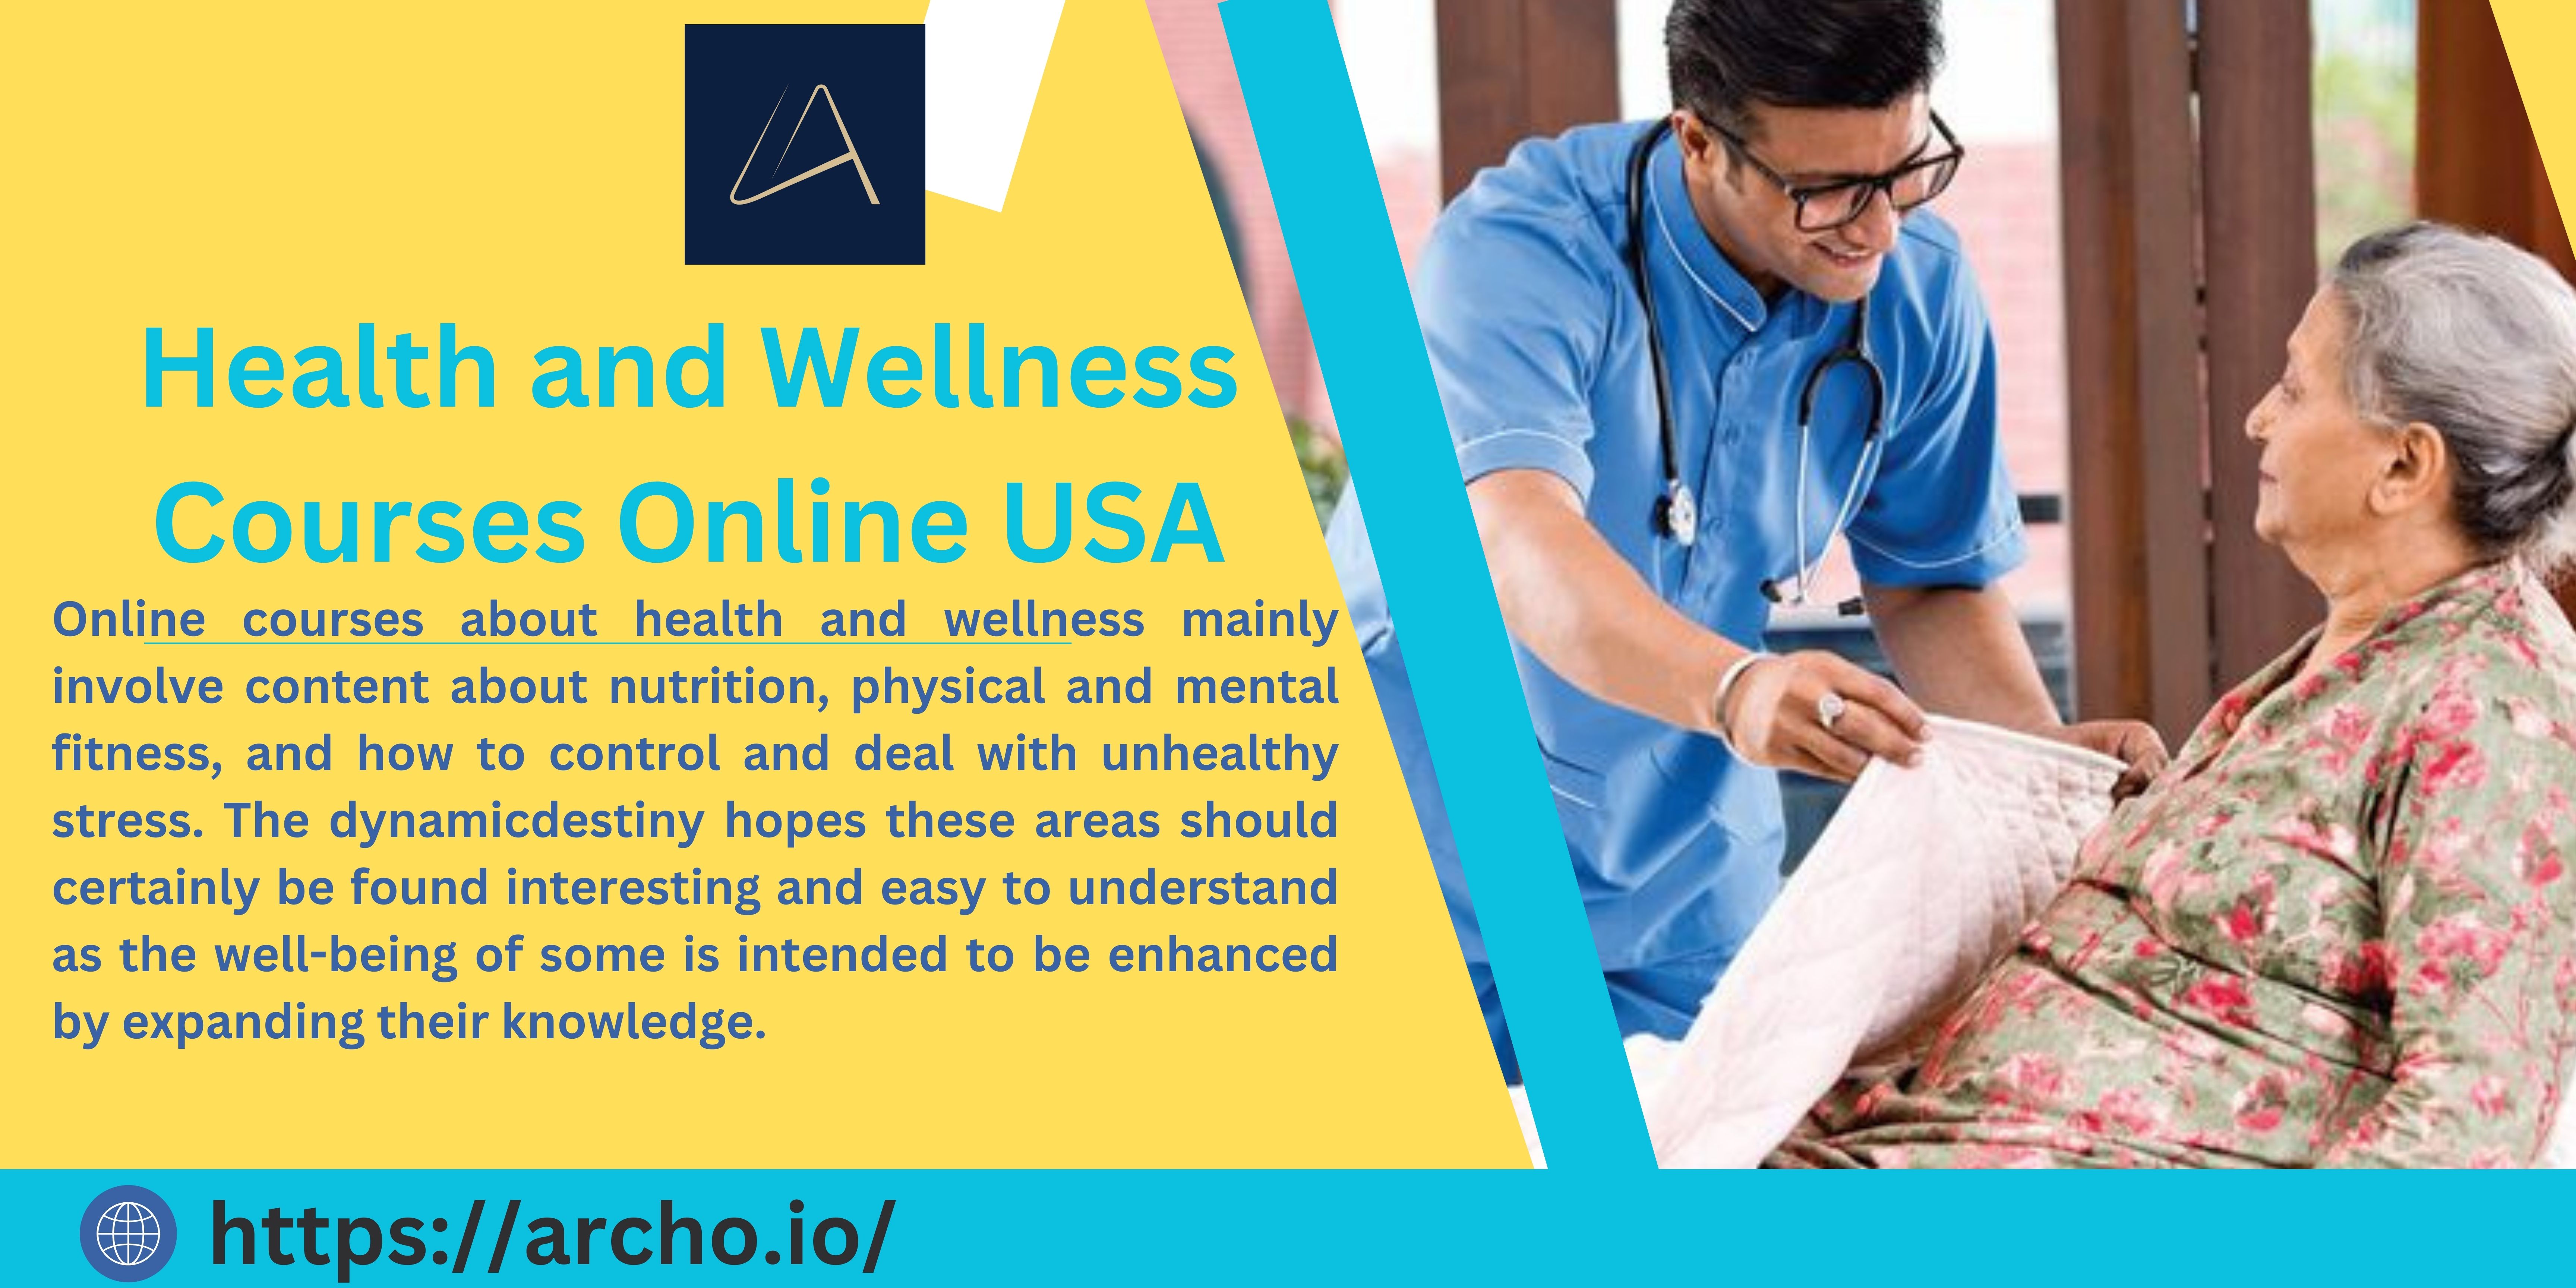 Health and Wellness Courses Online USA